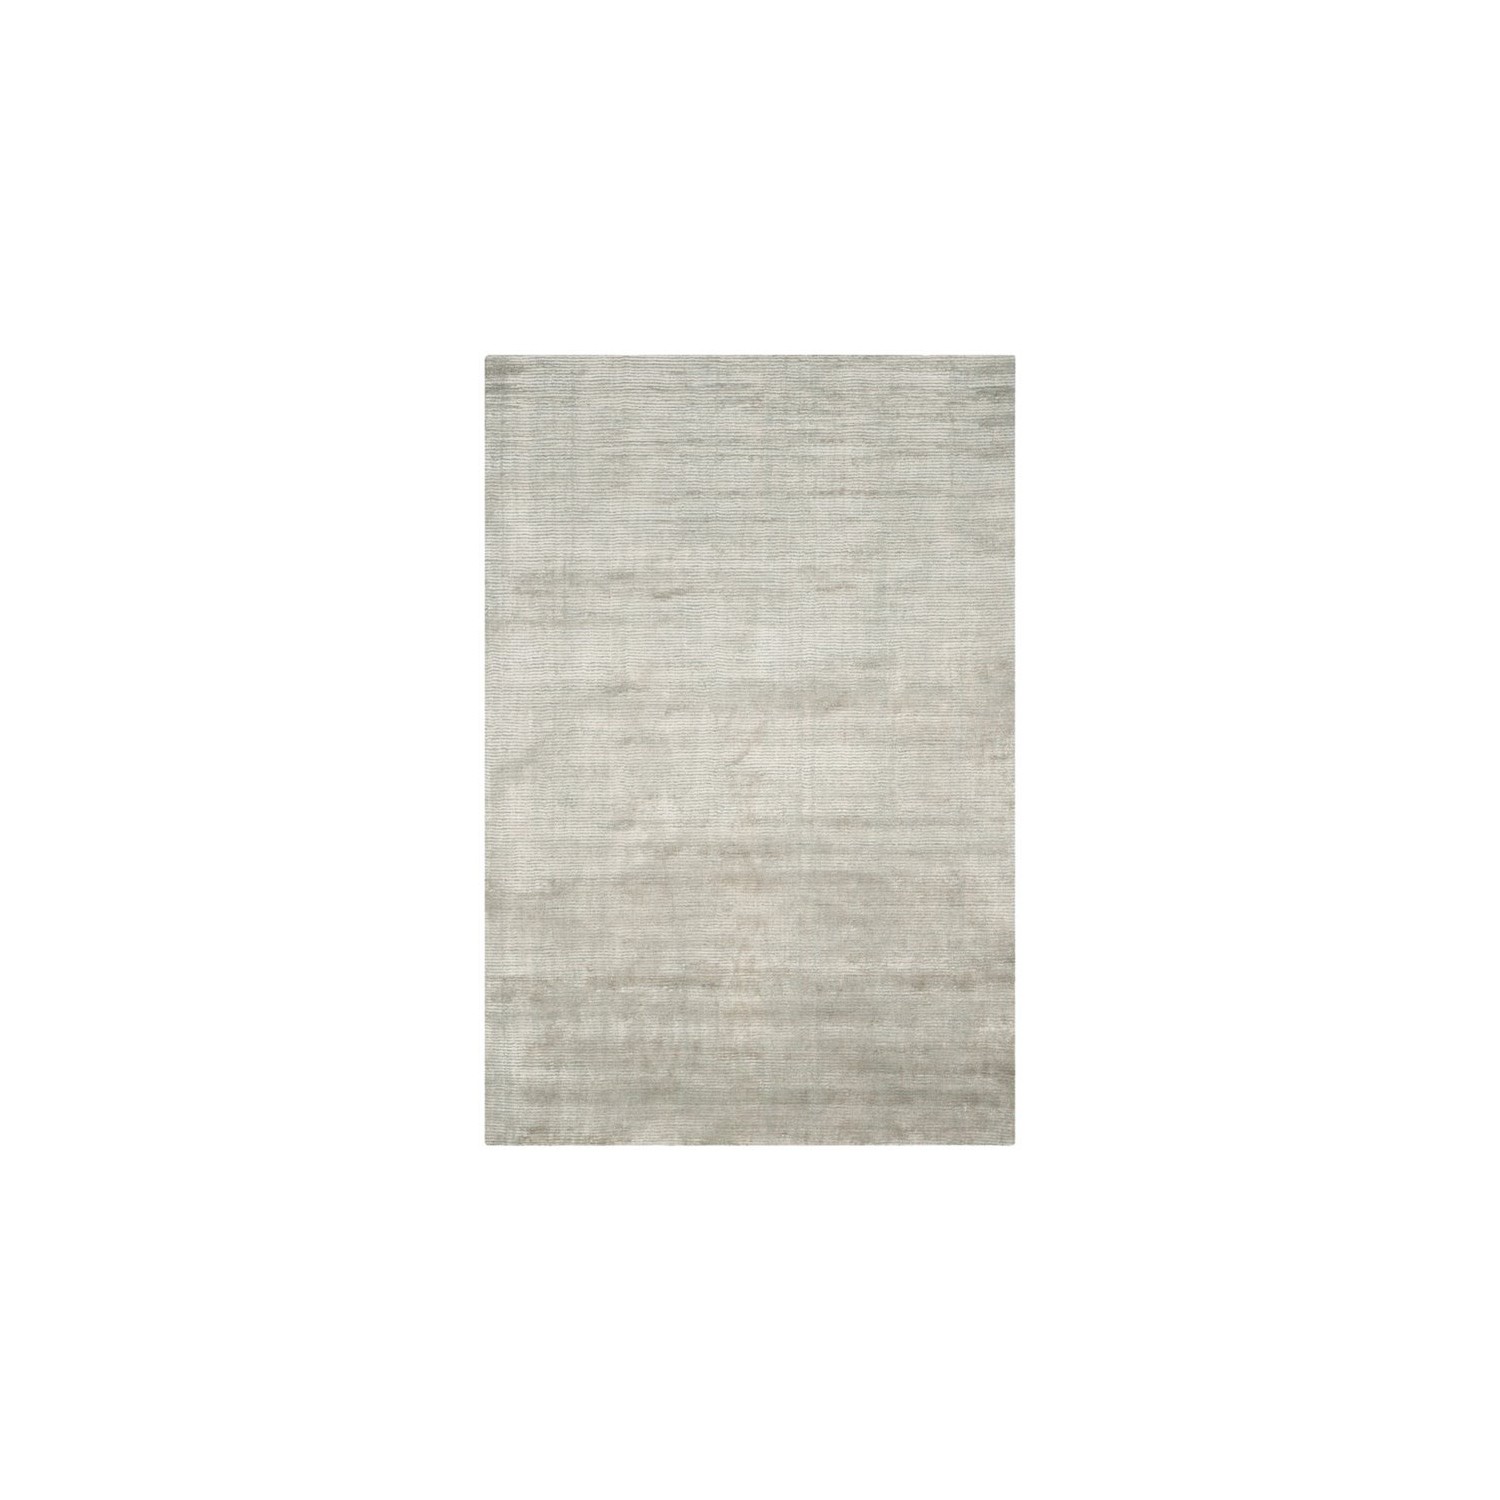 Safavieh Mirage 9' X 12' Loom Knotted Viscose Pile Rug in Gray